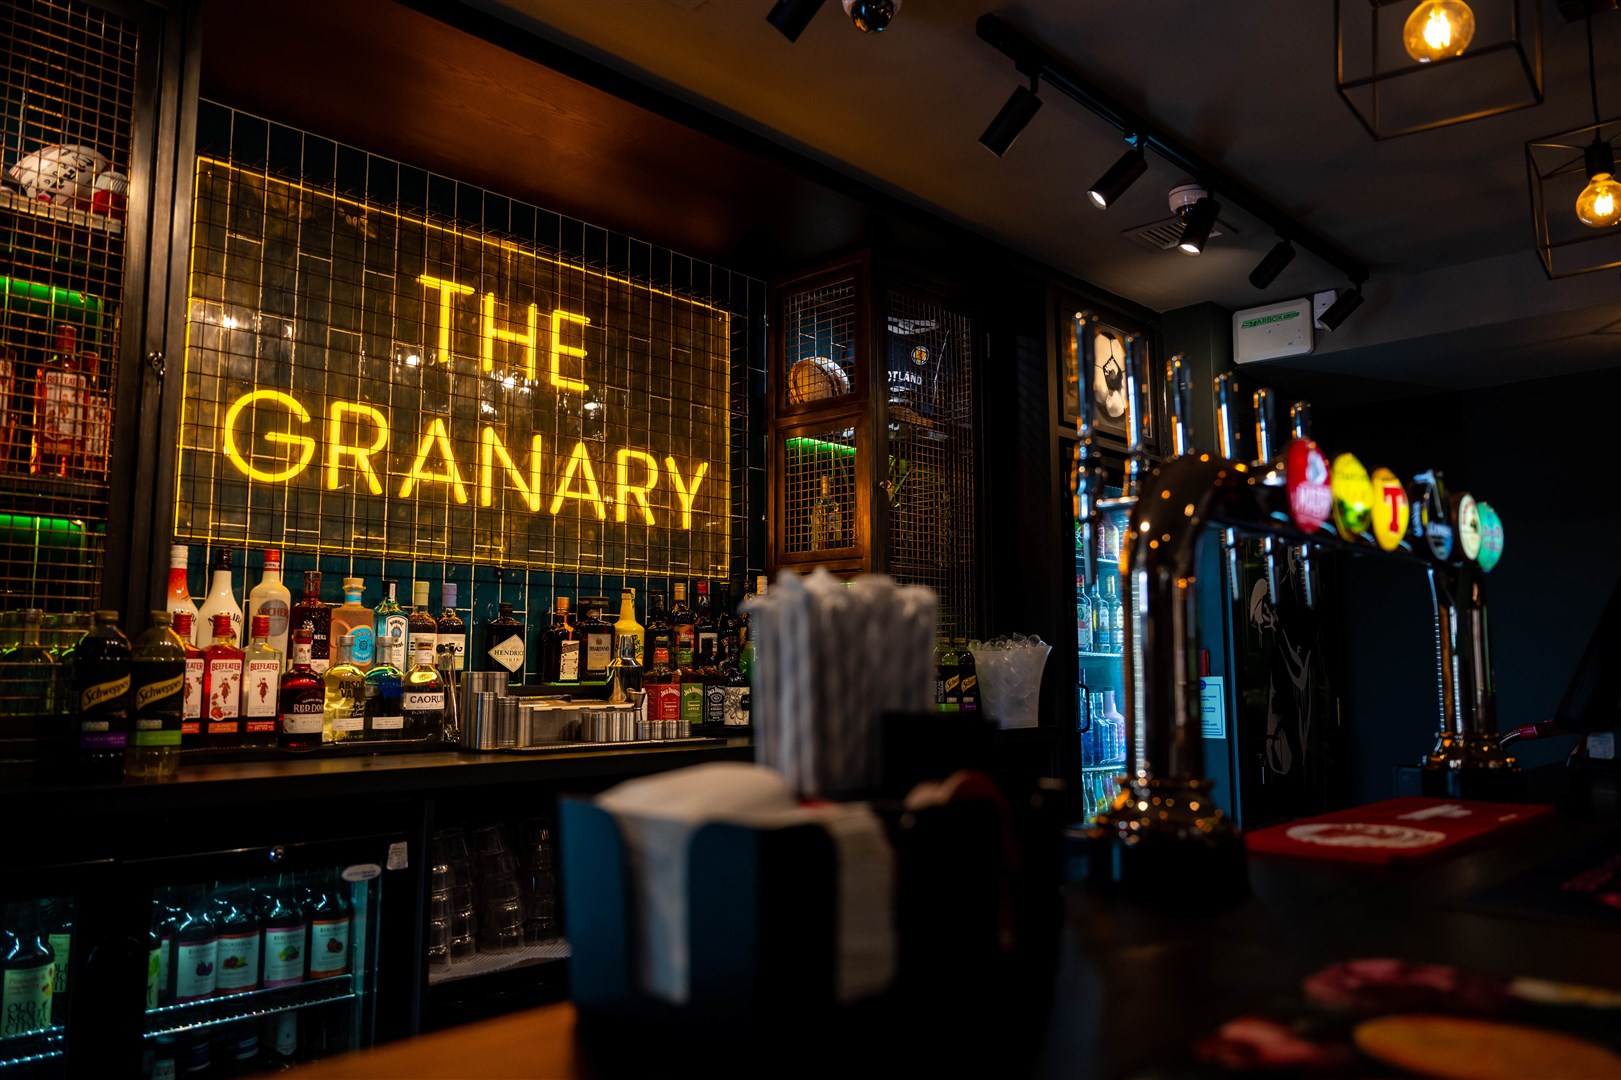 The Granary has reopened after a six week refit. Picture: Michal Wachucik / Abermedia